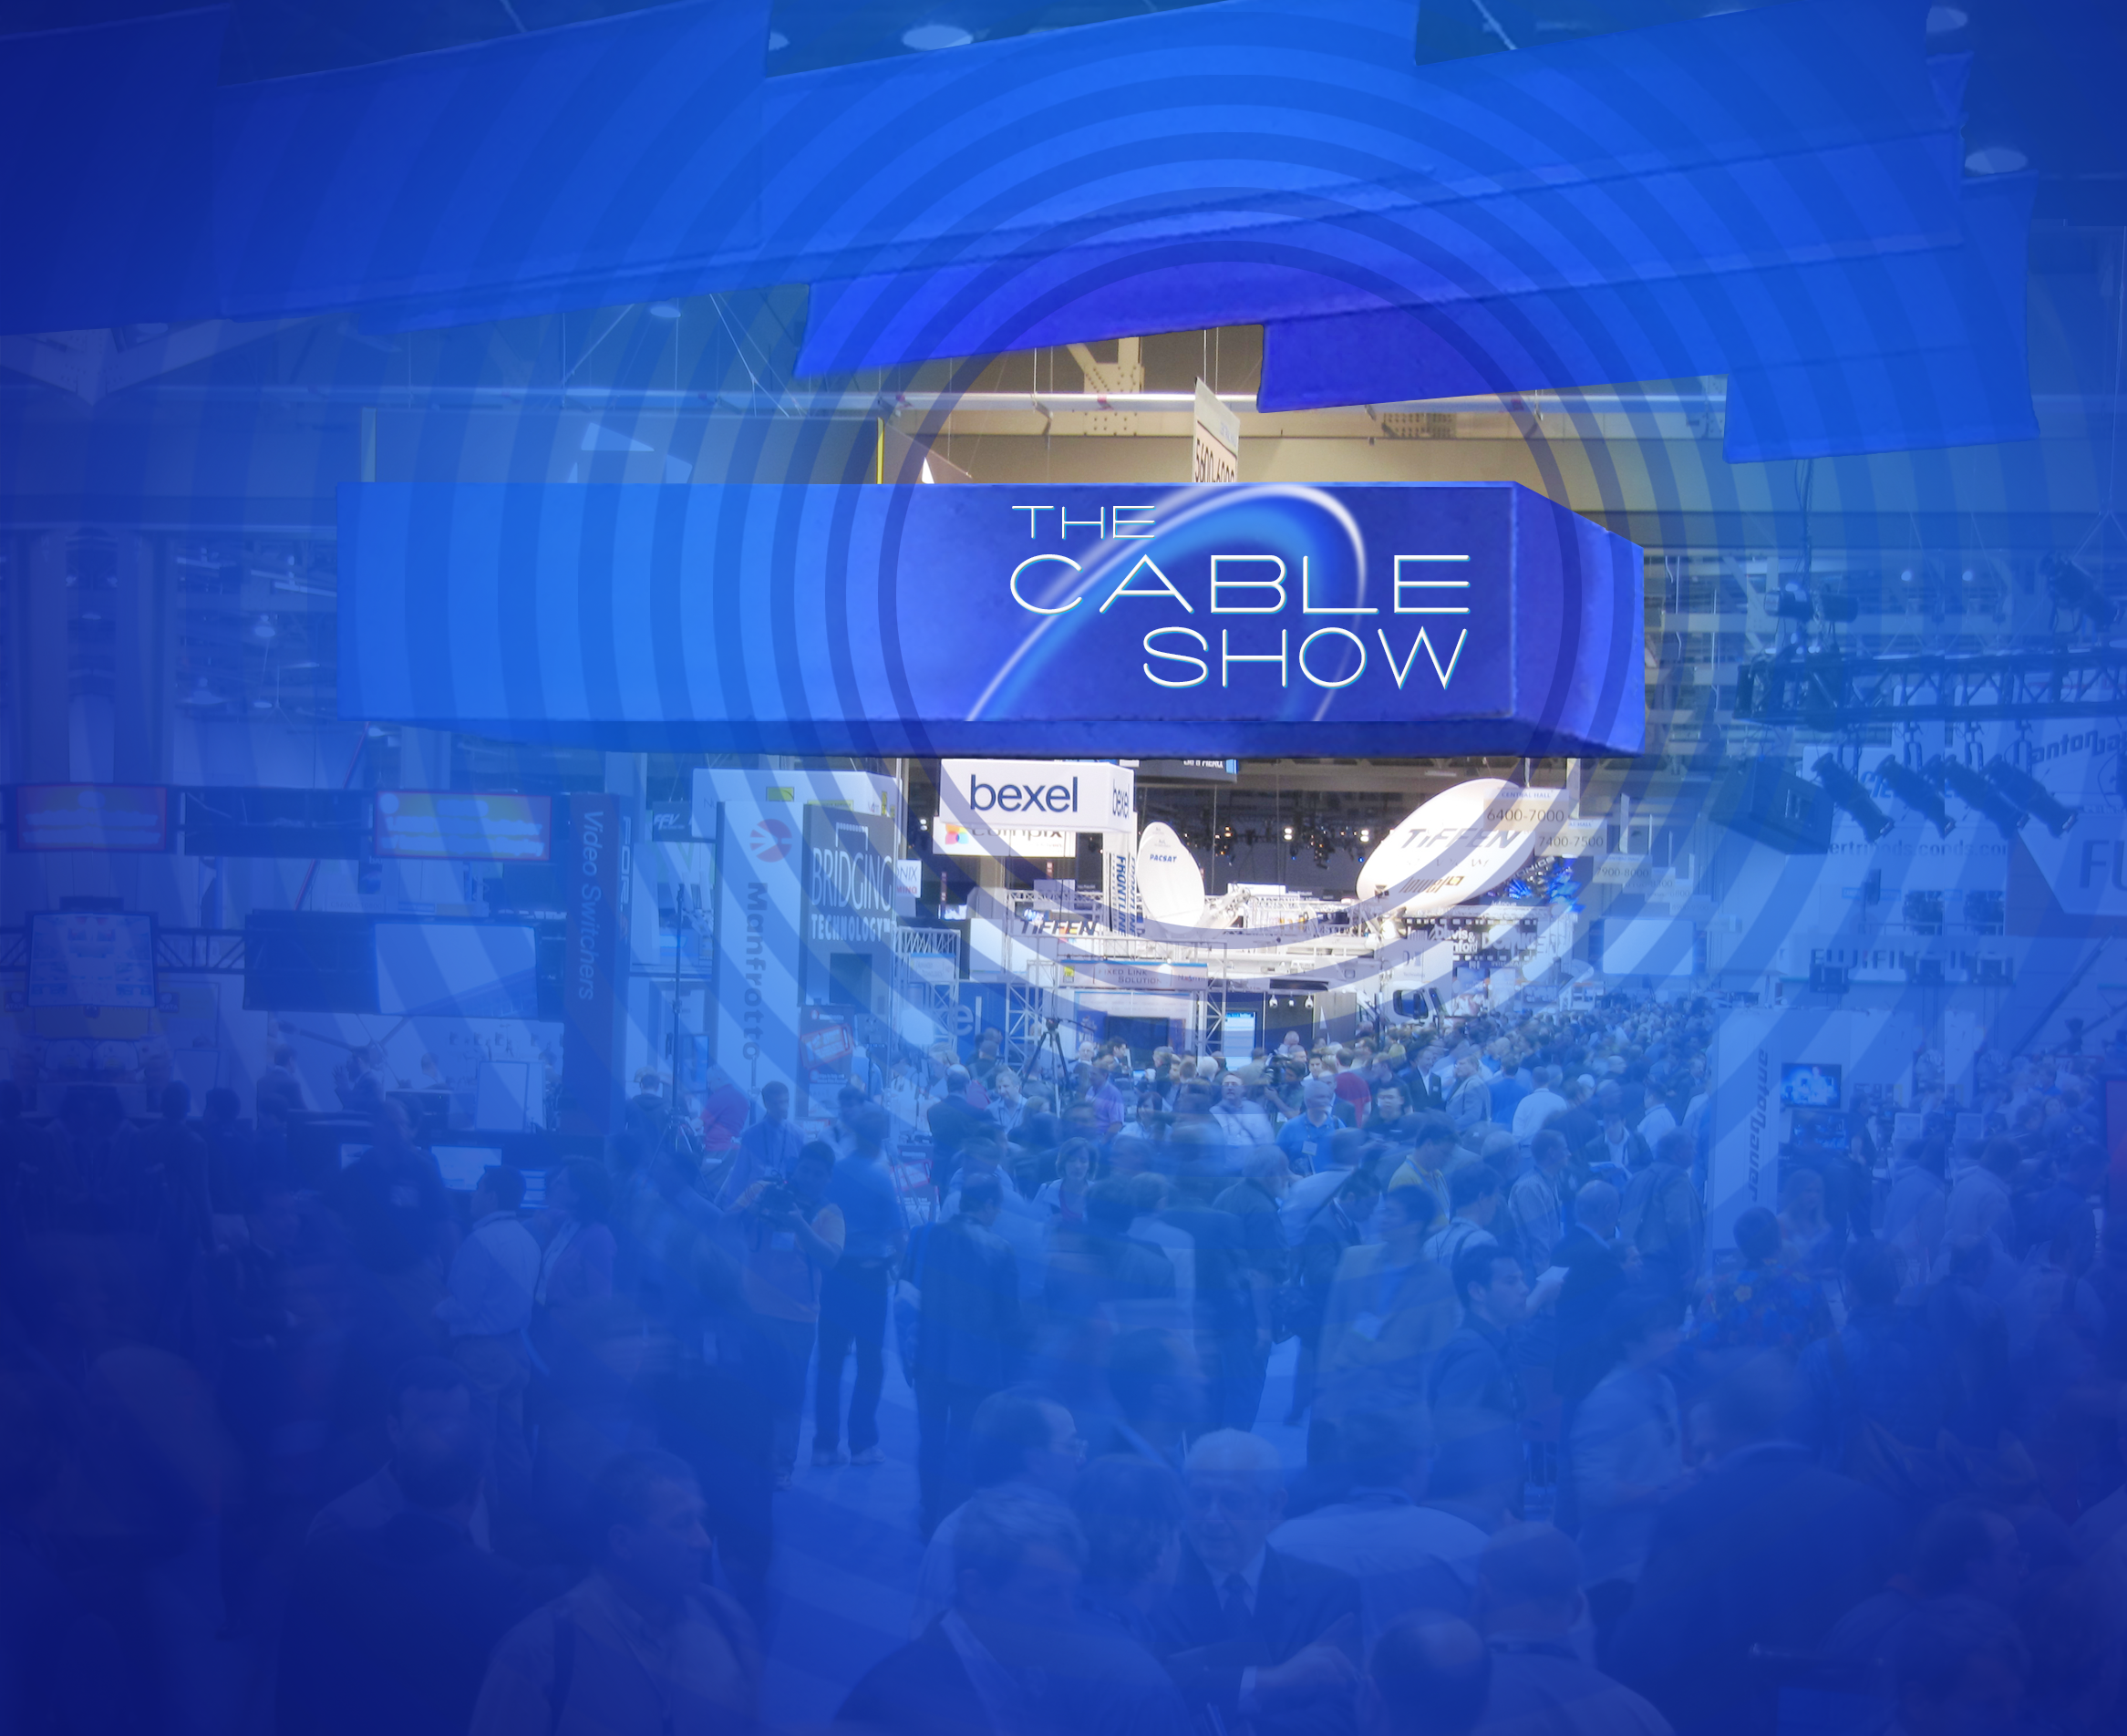 The Cable Show Exhibitor's Floor